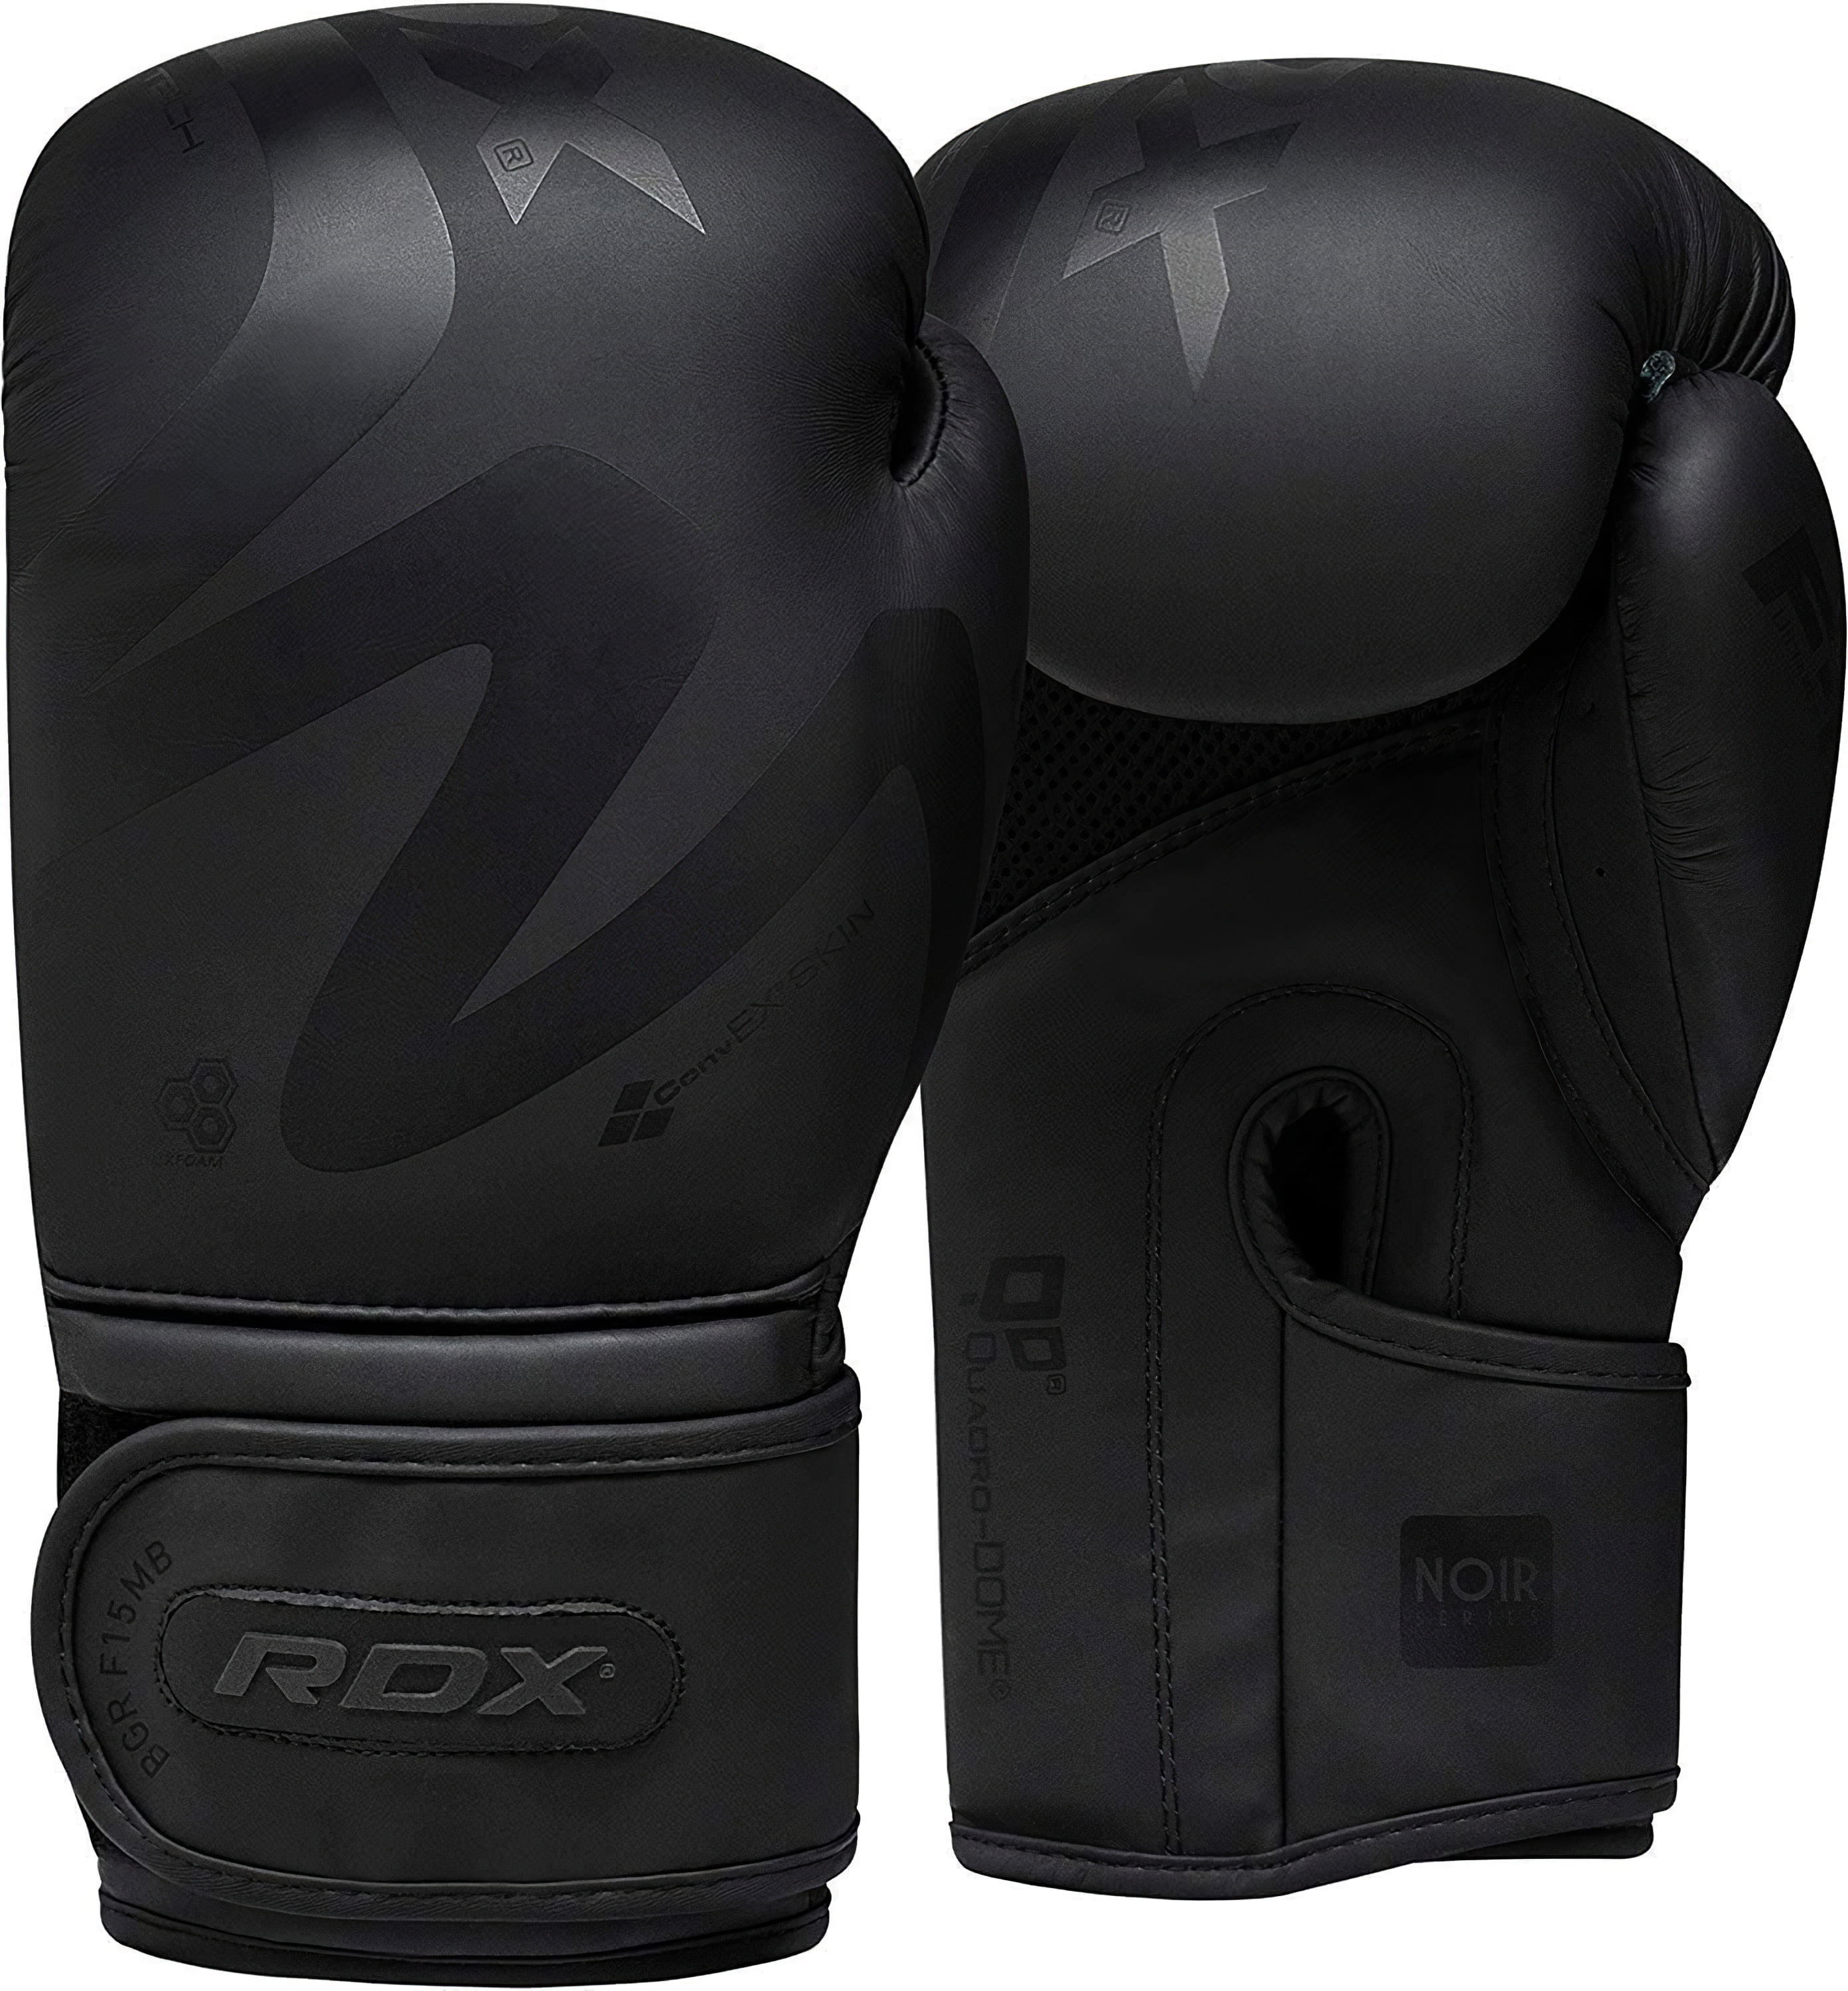 Boxing Gloves Sparring Punch Bag Mitts Training Gloves MMA Kickboxing Black S/M 